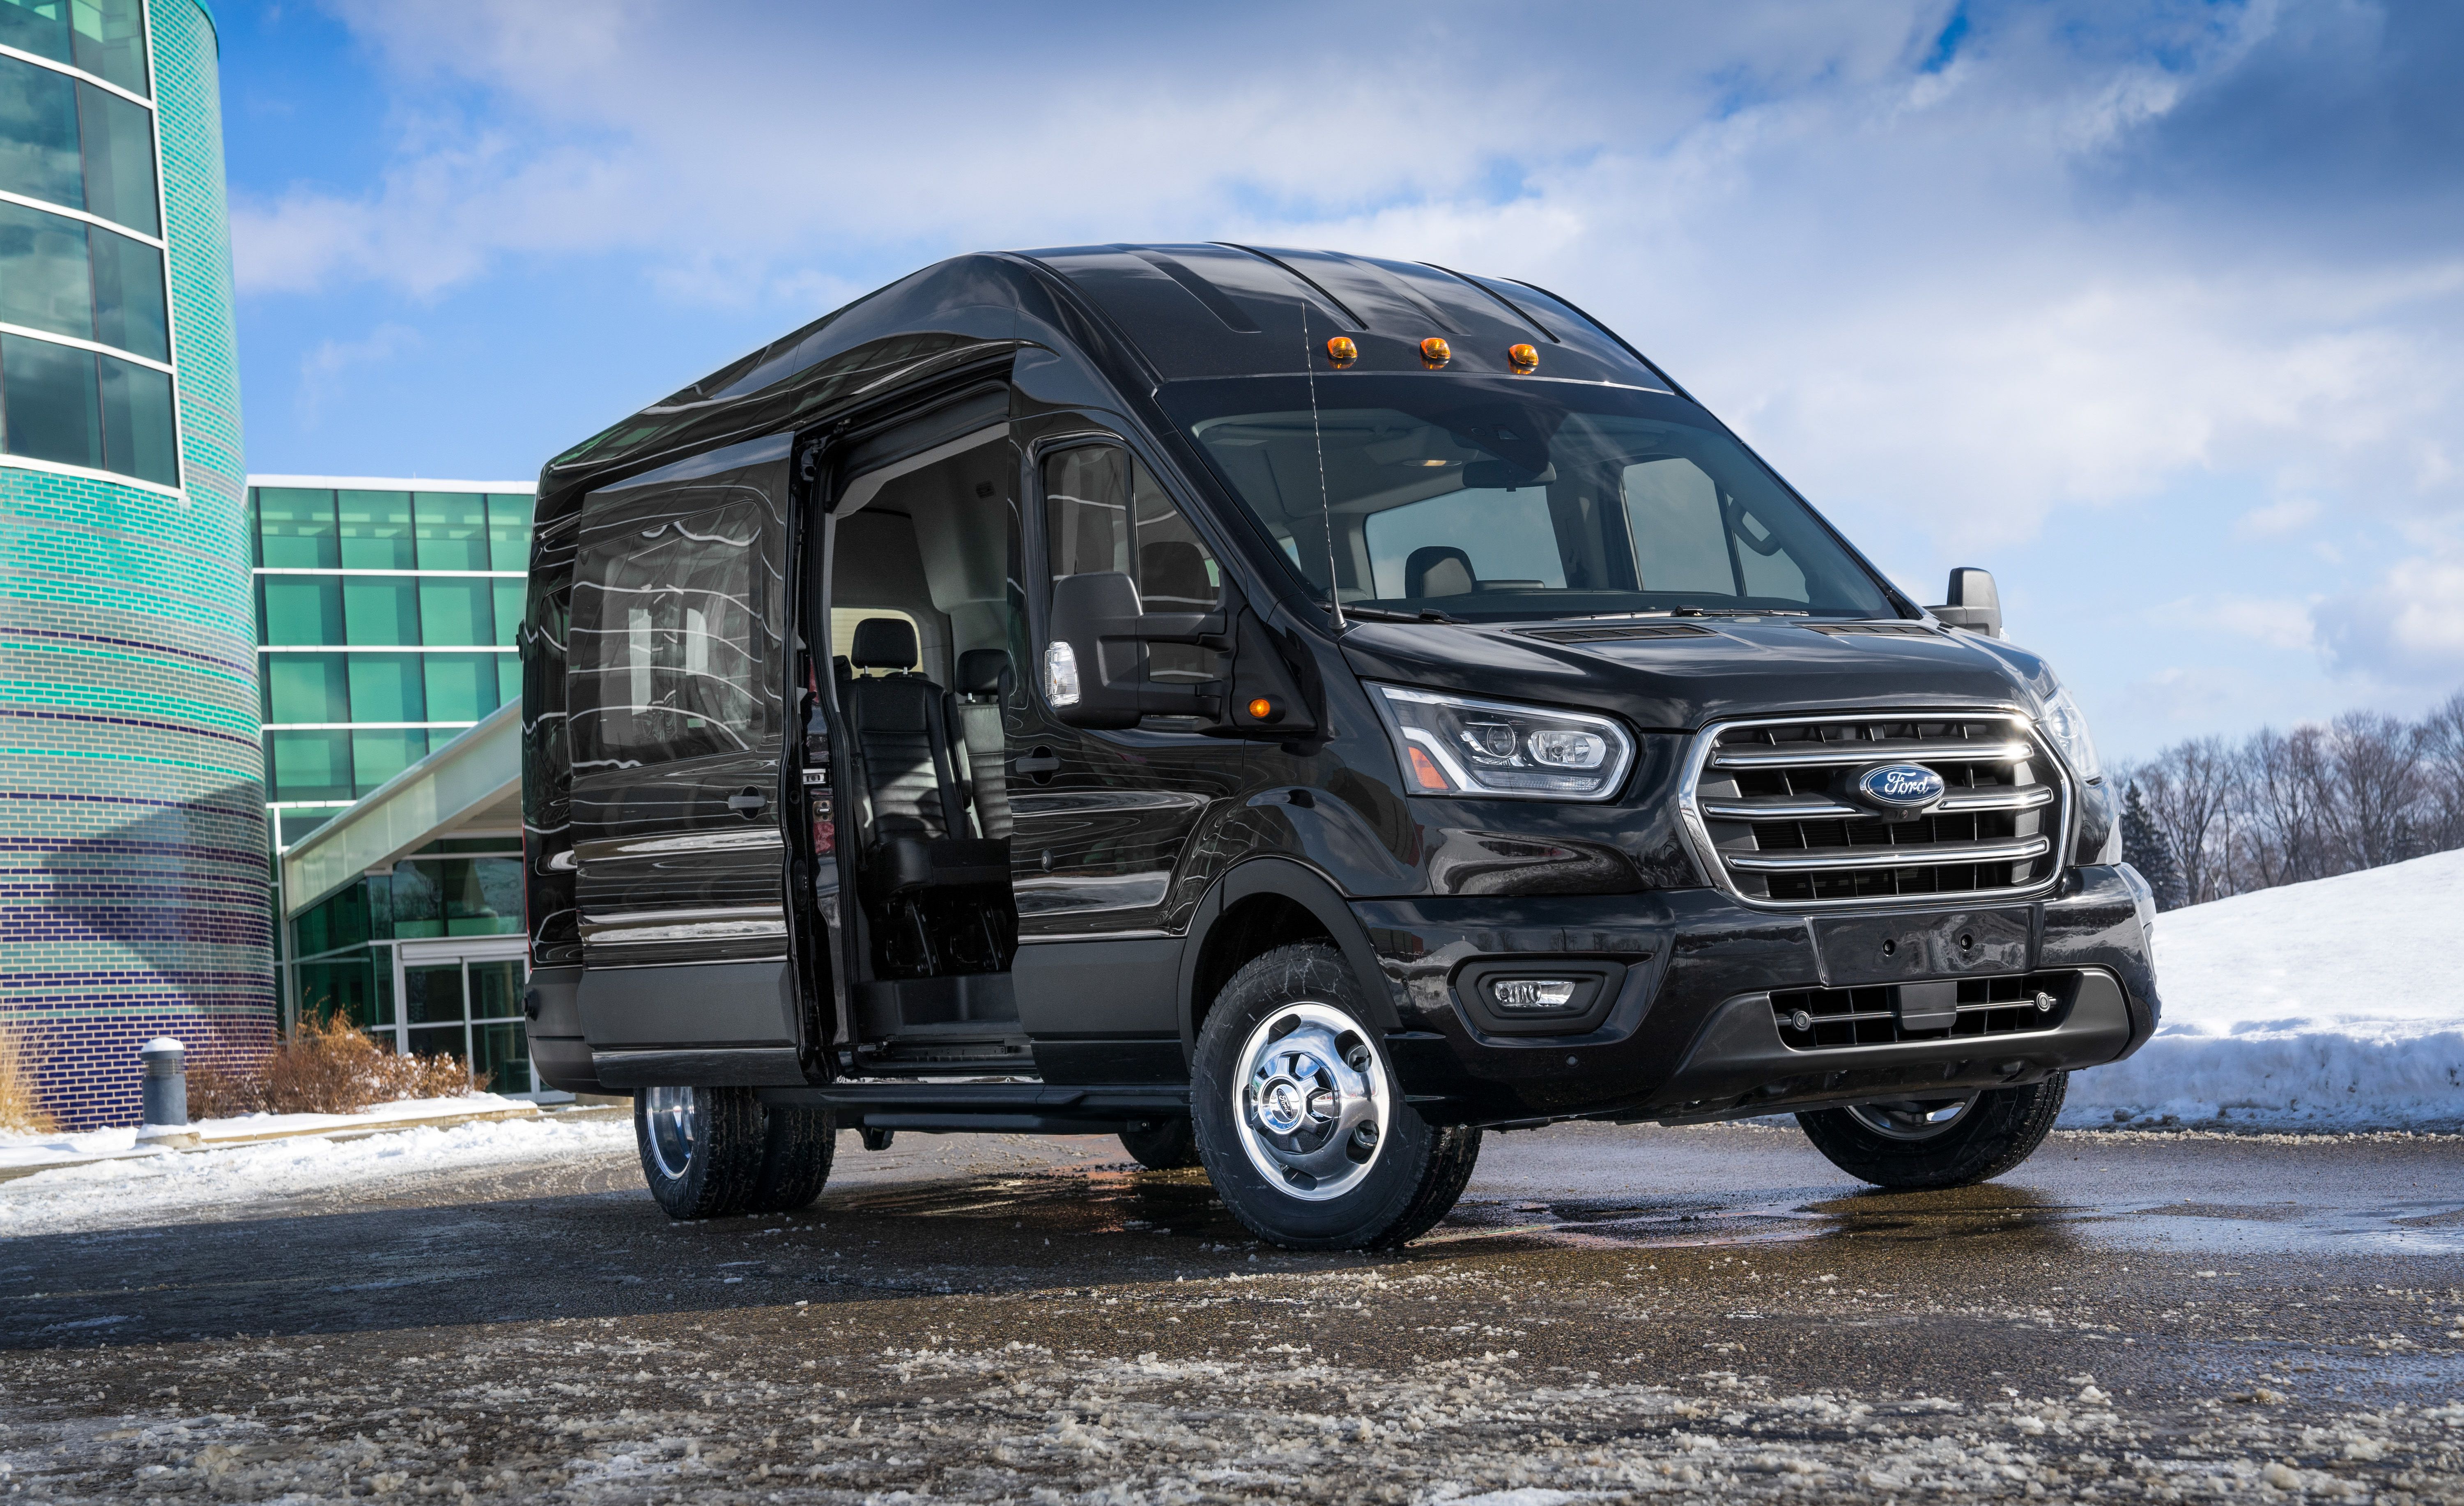 cost of ford transit van